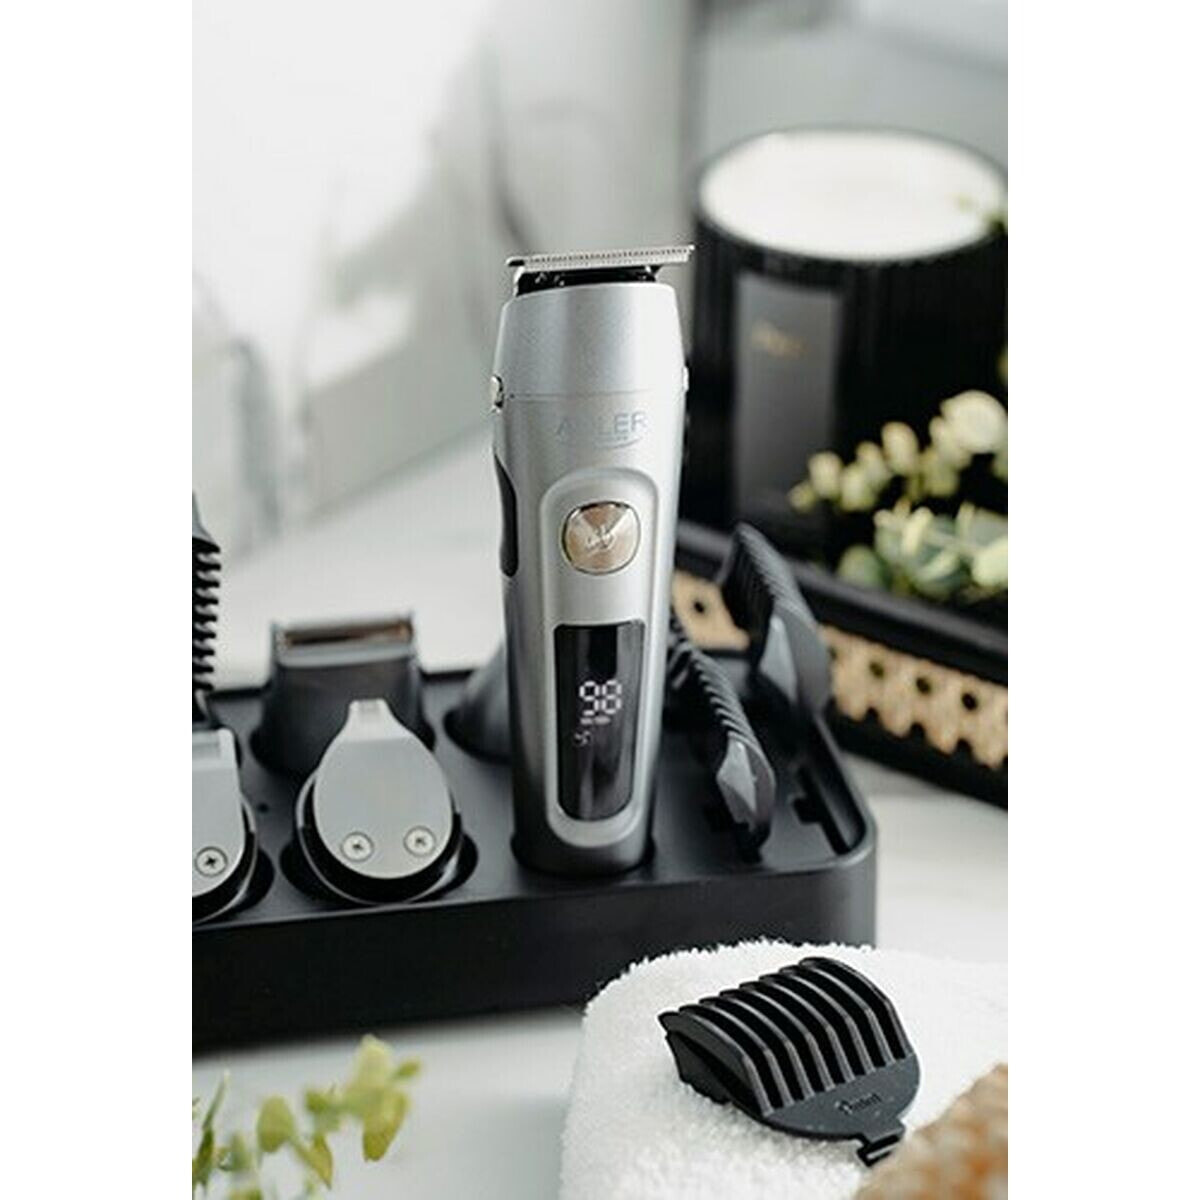 Hair clippers/Shaver Adler AD 2944